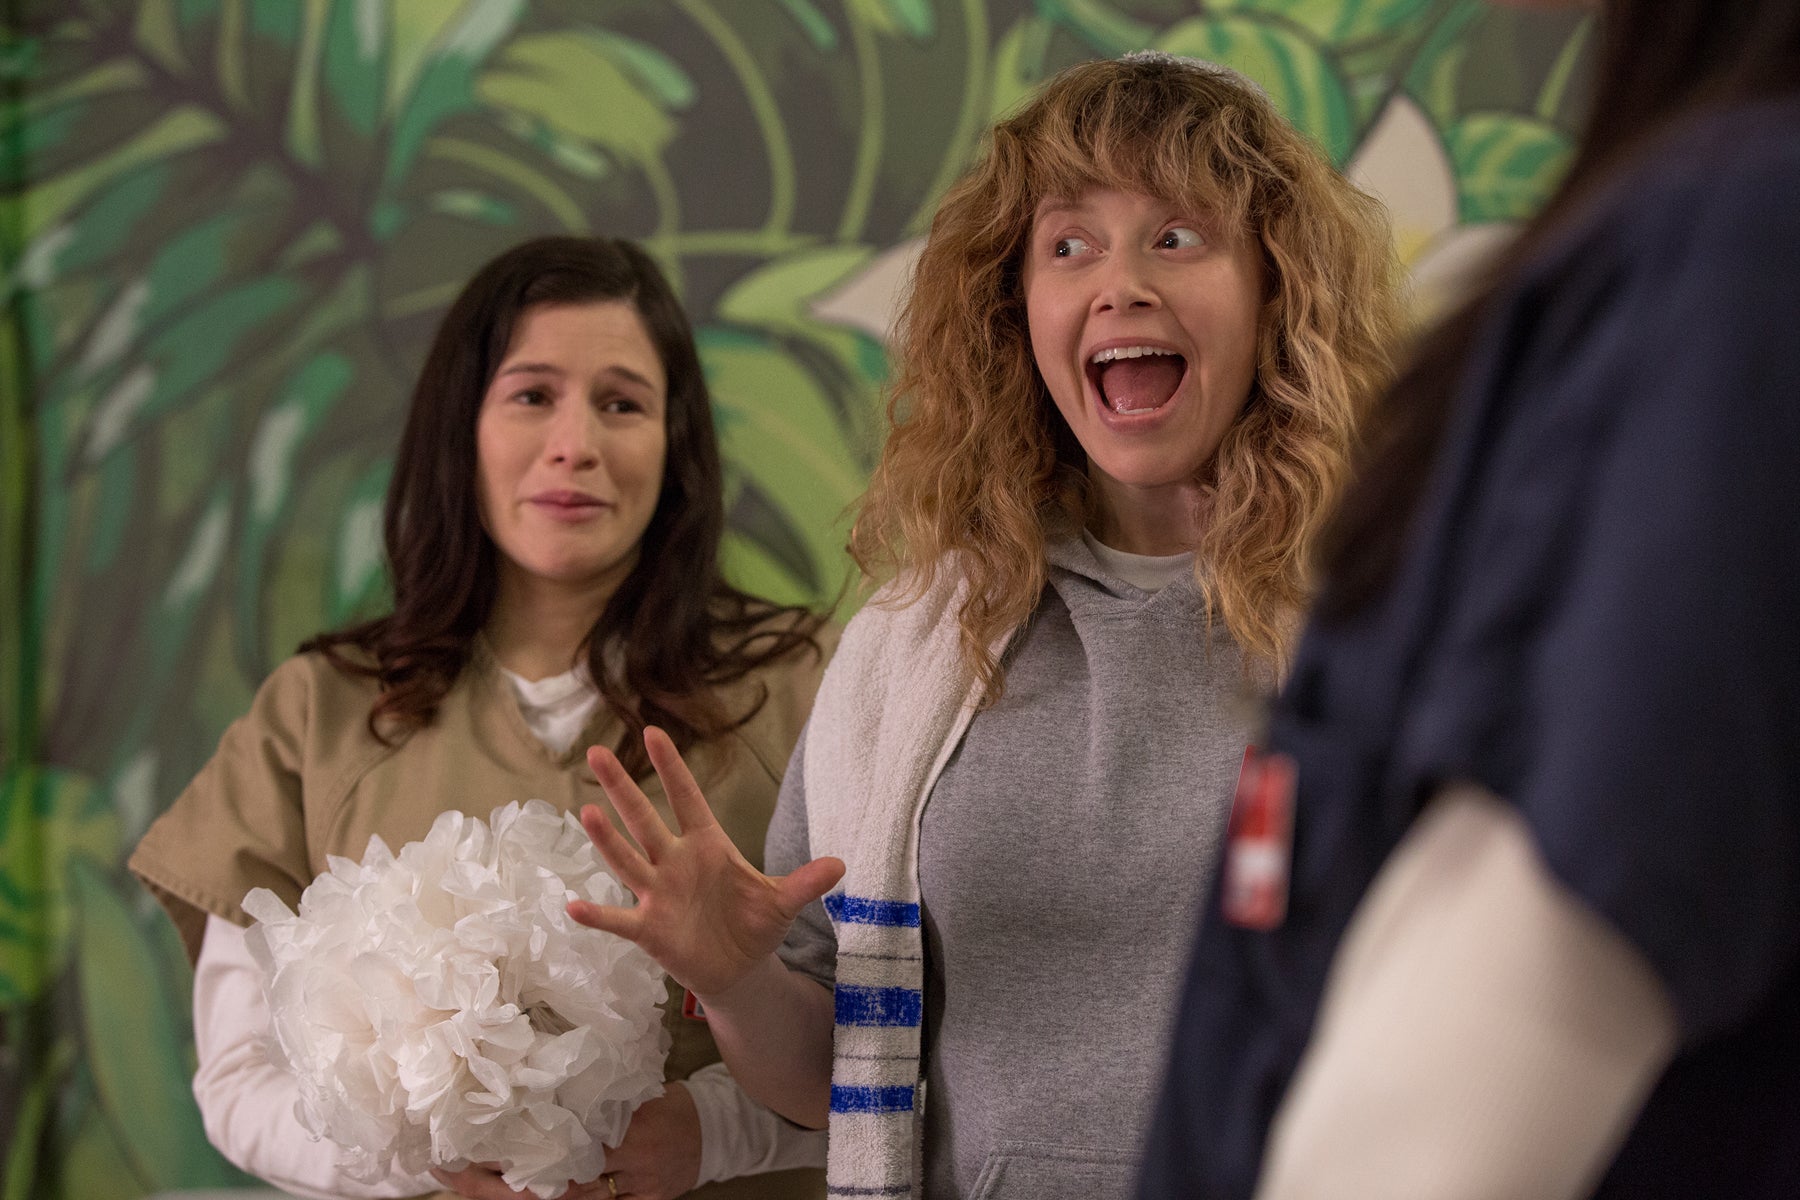 Nicky Nicholson cheers while Lorna Morello holds flowers and cries in the background in an episode of Orange Is the New Black.